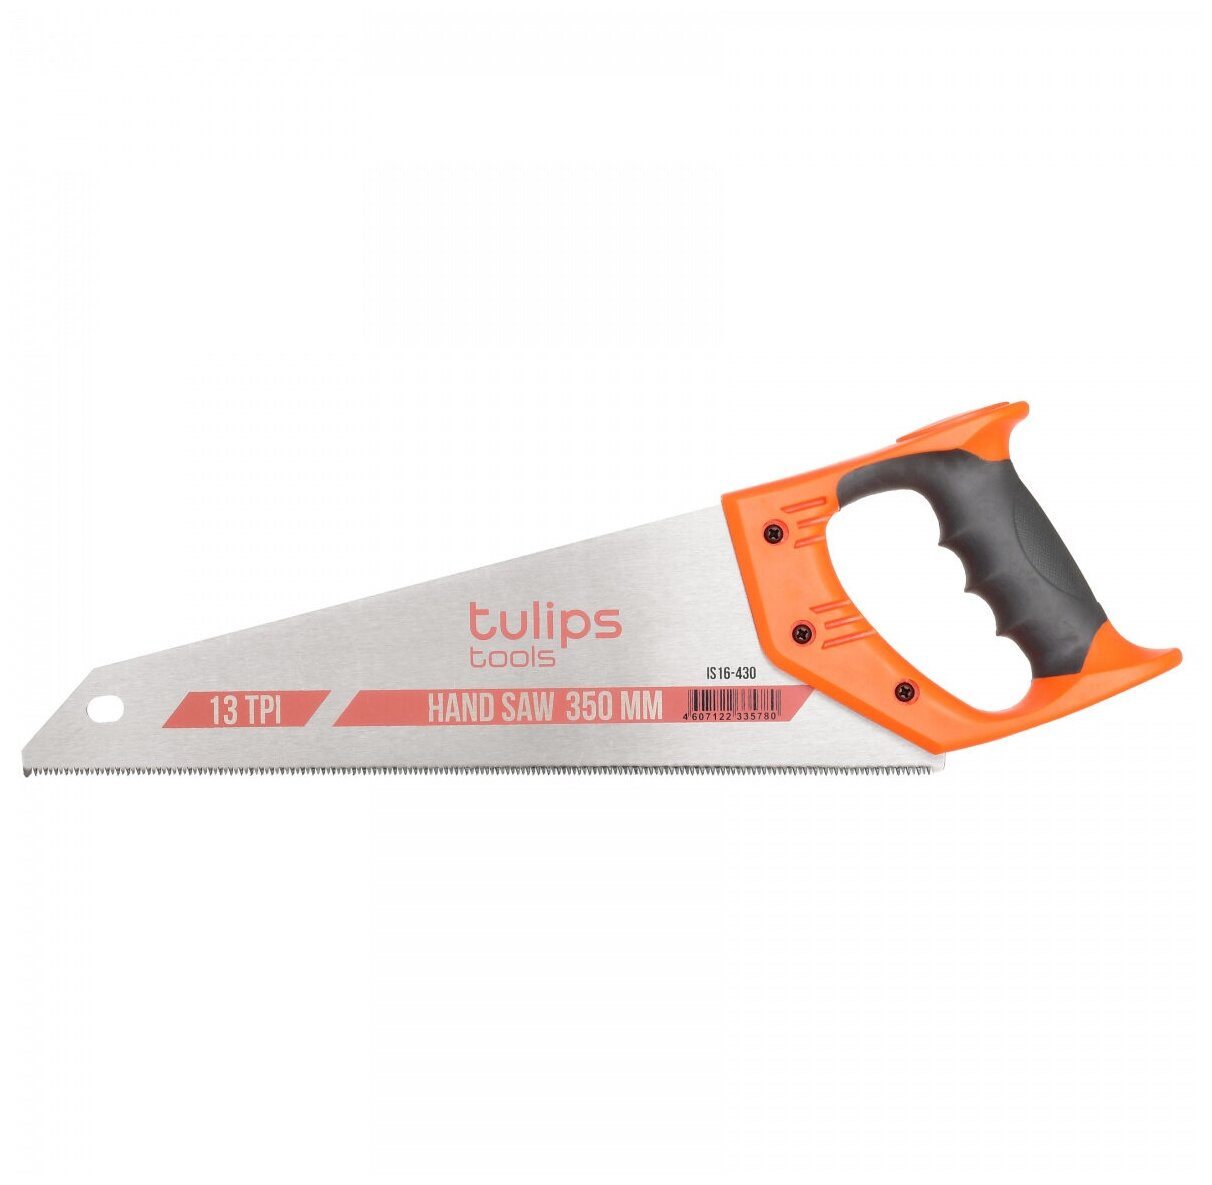    Tulips tools IS16-430, 350, 13TPI,  3D .